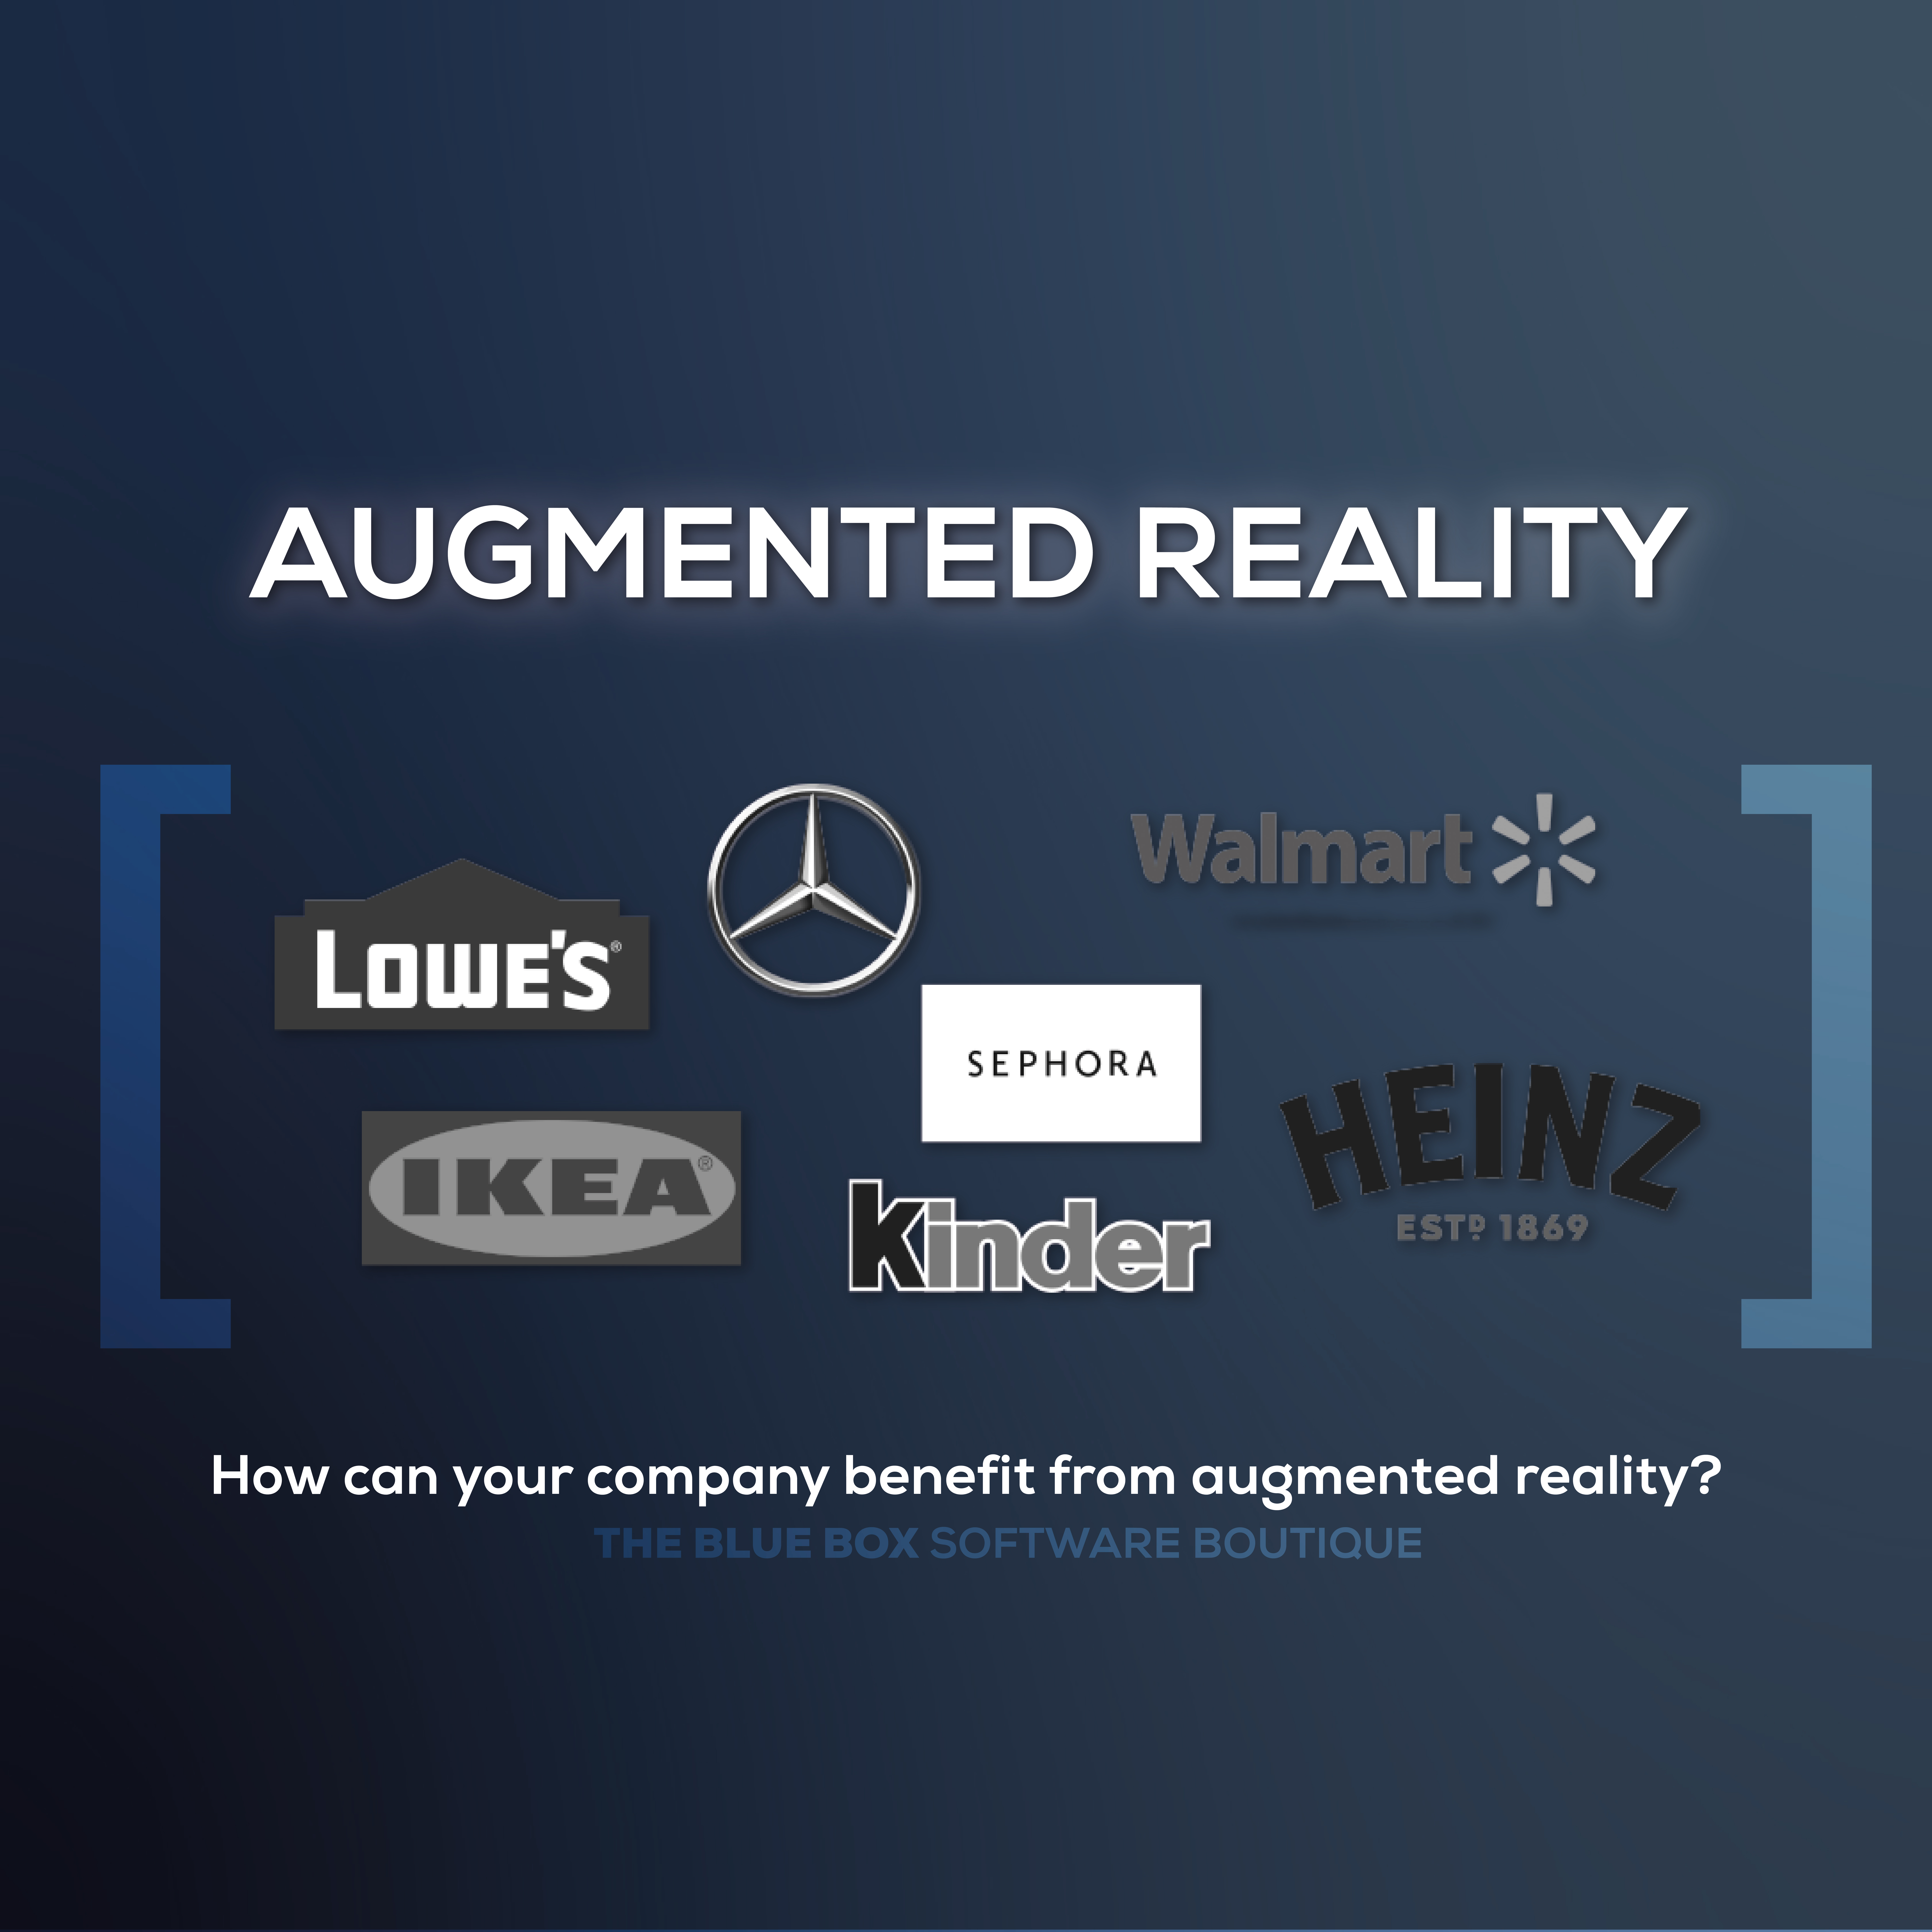 Augmented reality brands